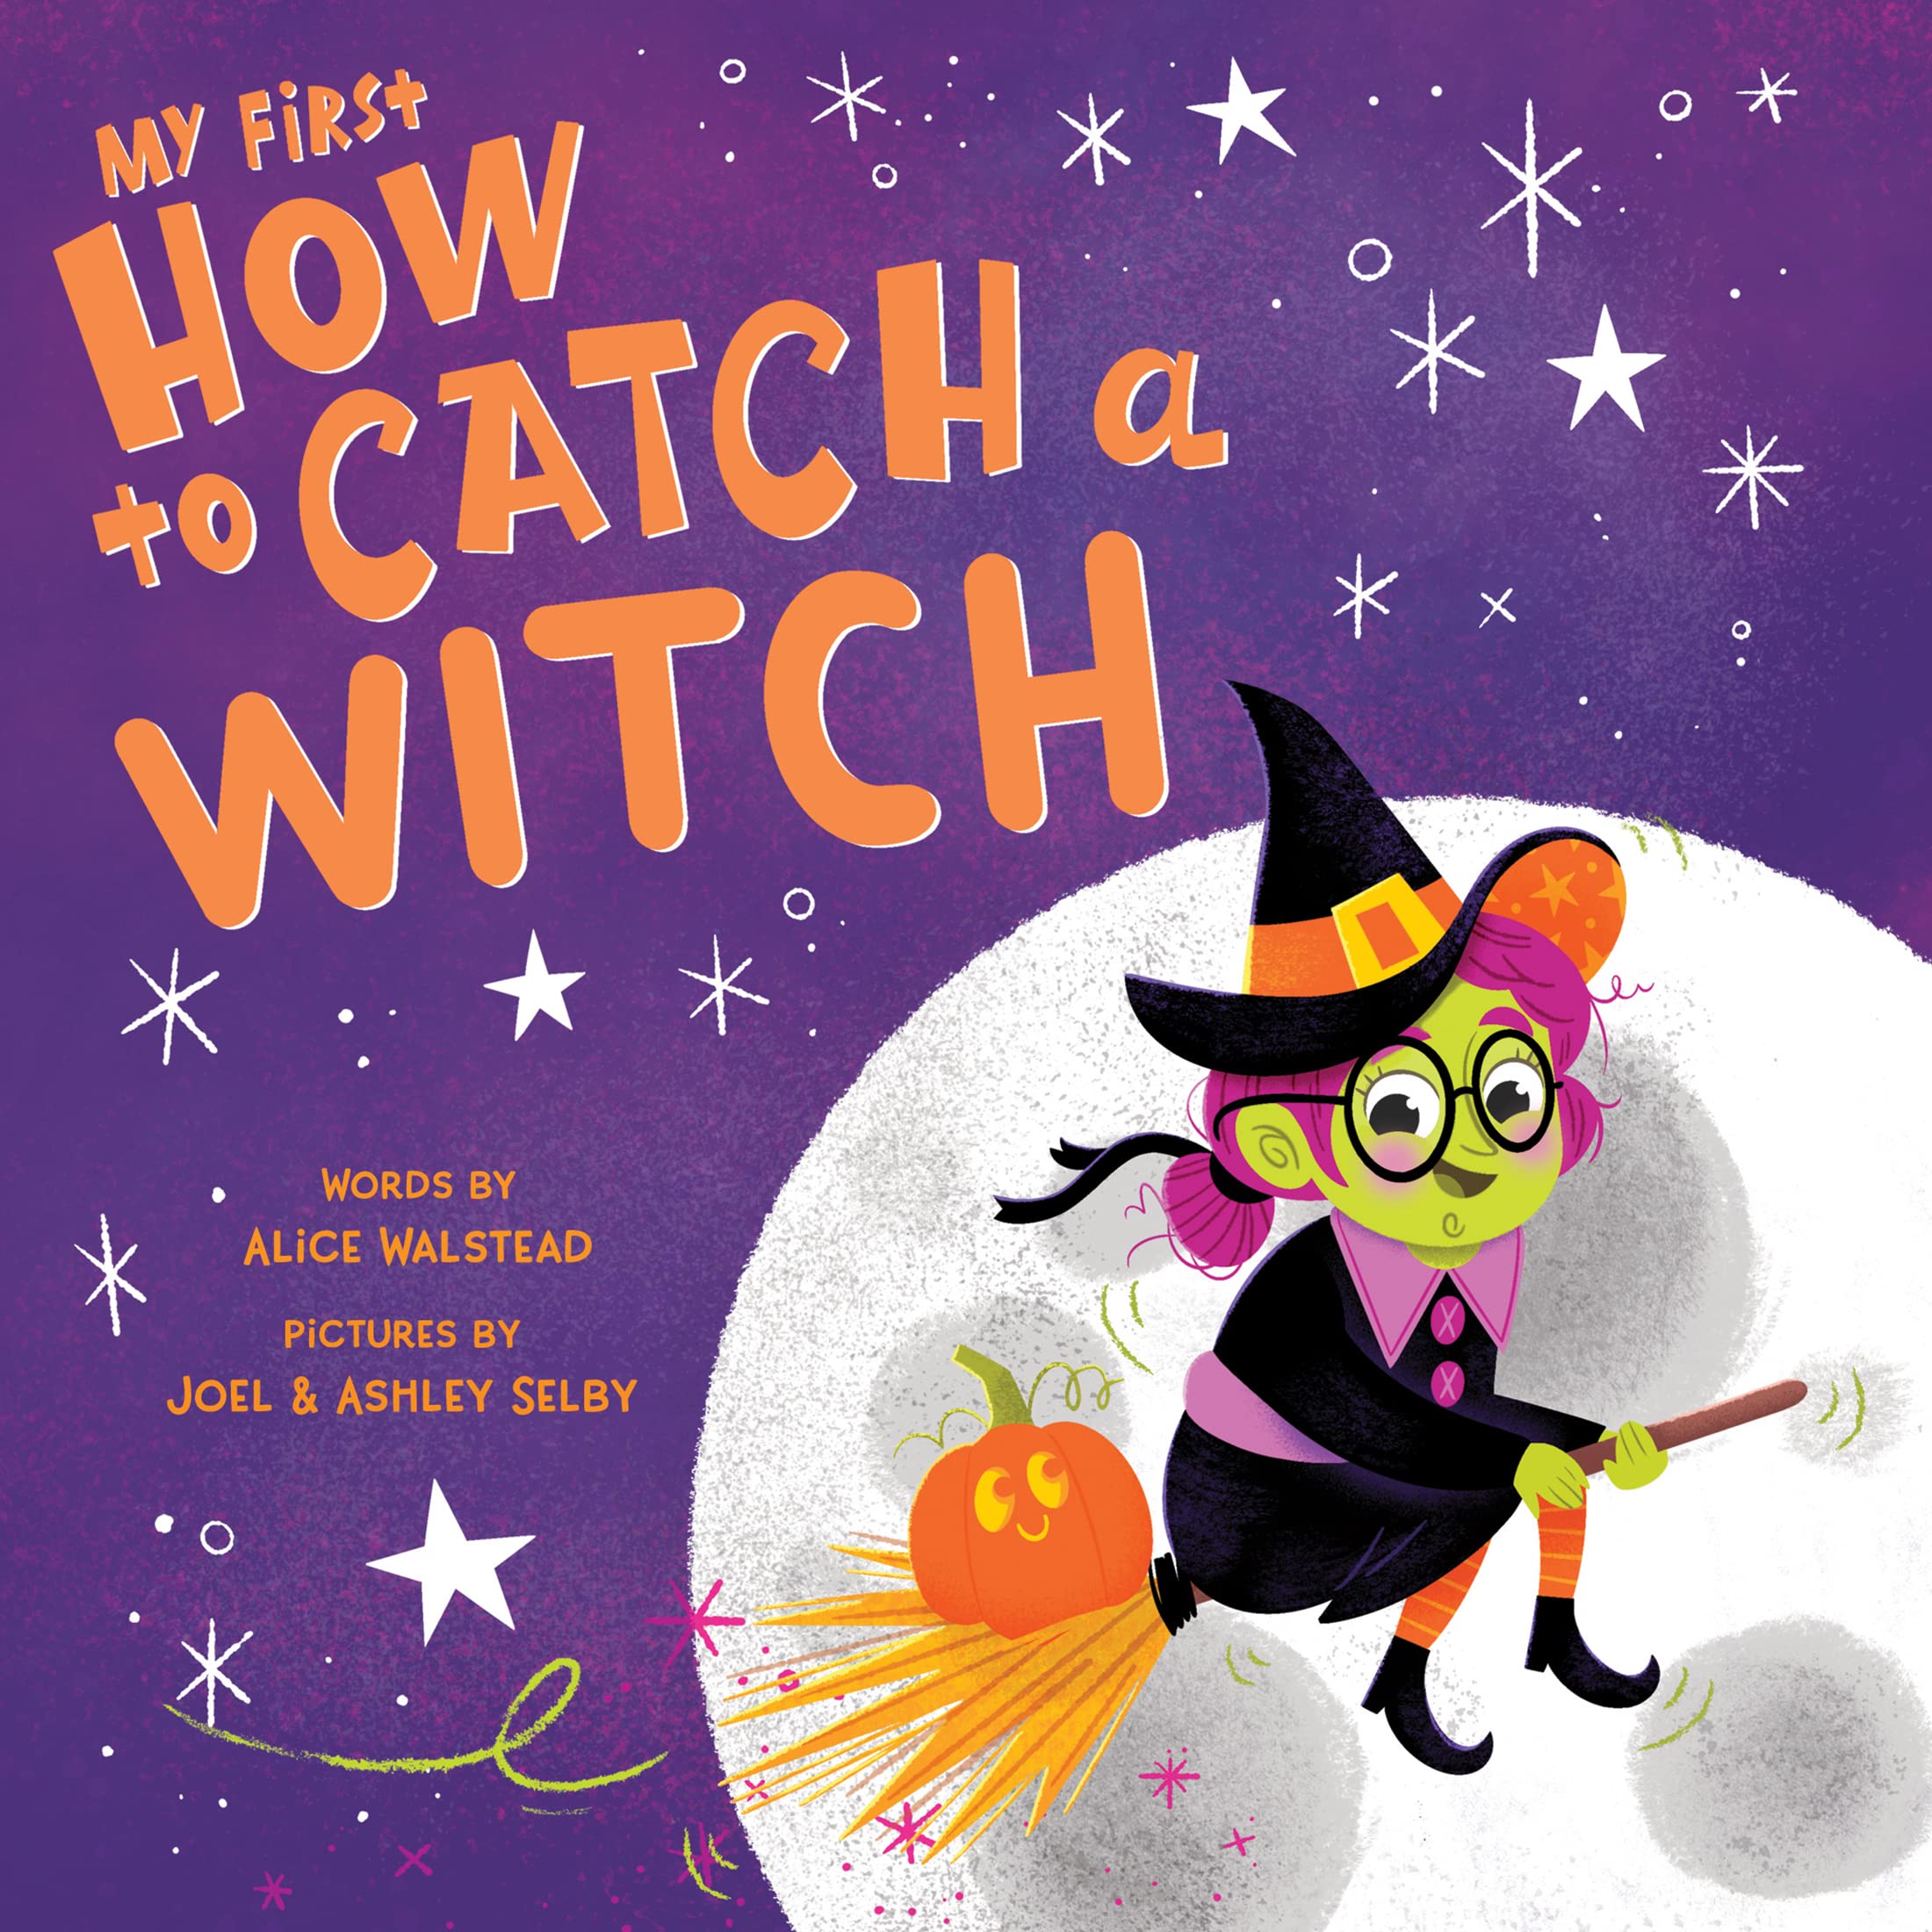 Halloween Board/Hardcover Books for Children: How to Catch a Witch $2.17 / A Spooky Sesame Street Treat $2.20 + Free Ship w/Prime